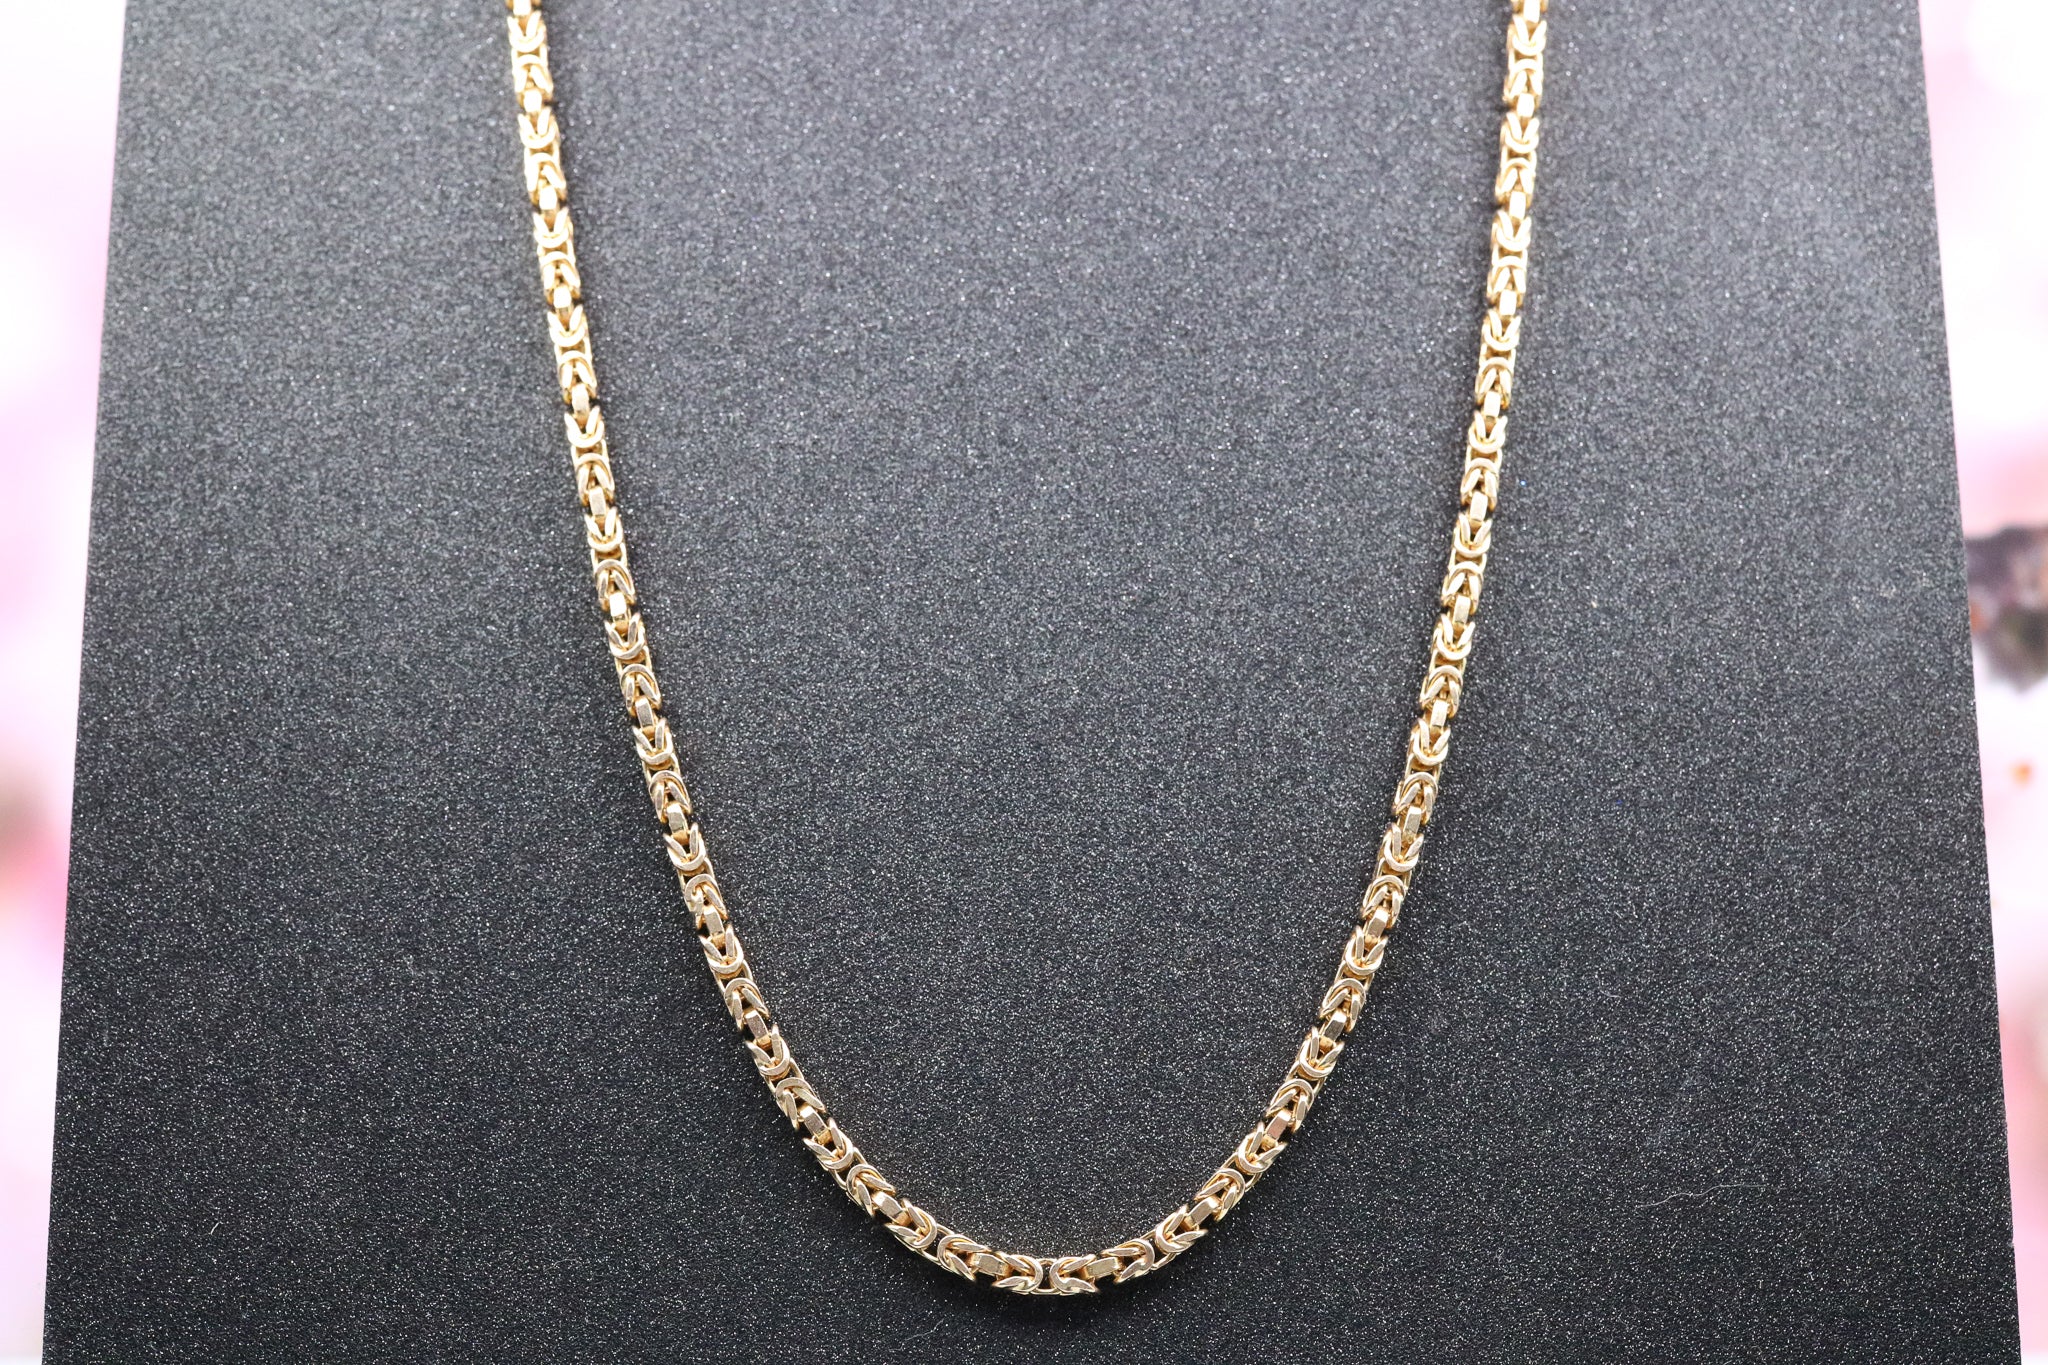 9ct Yellow Gold Gents Chain - HJ2435 - Hallmark Jewellers Formby & The Jewellers Bench Widnes